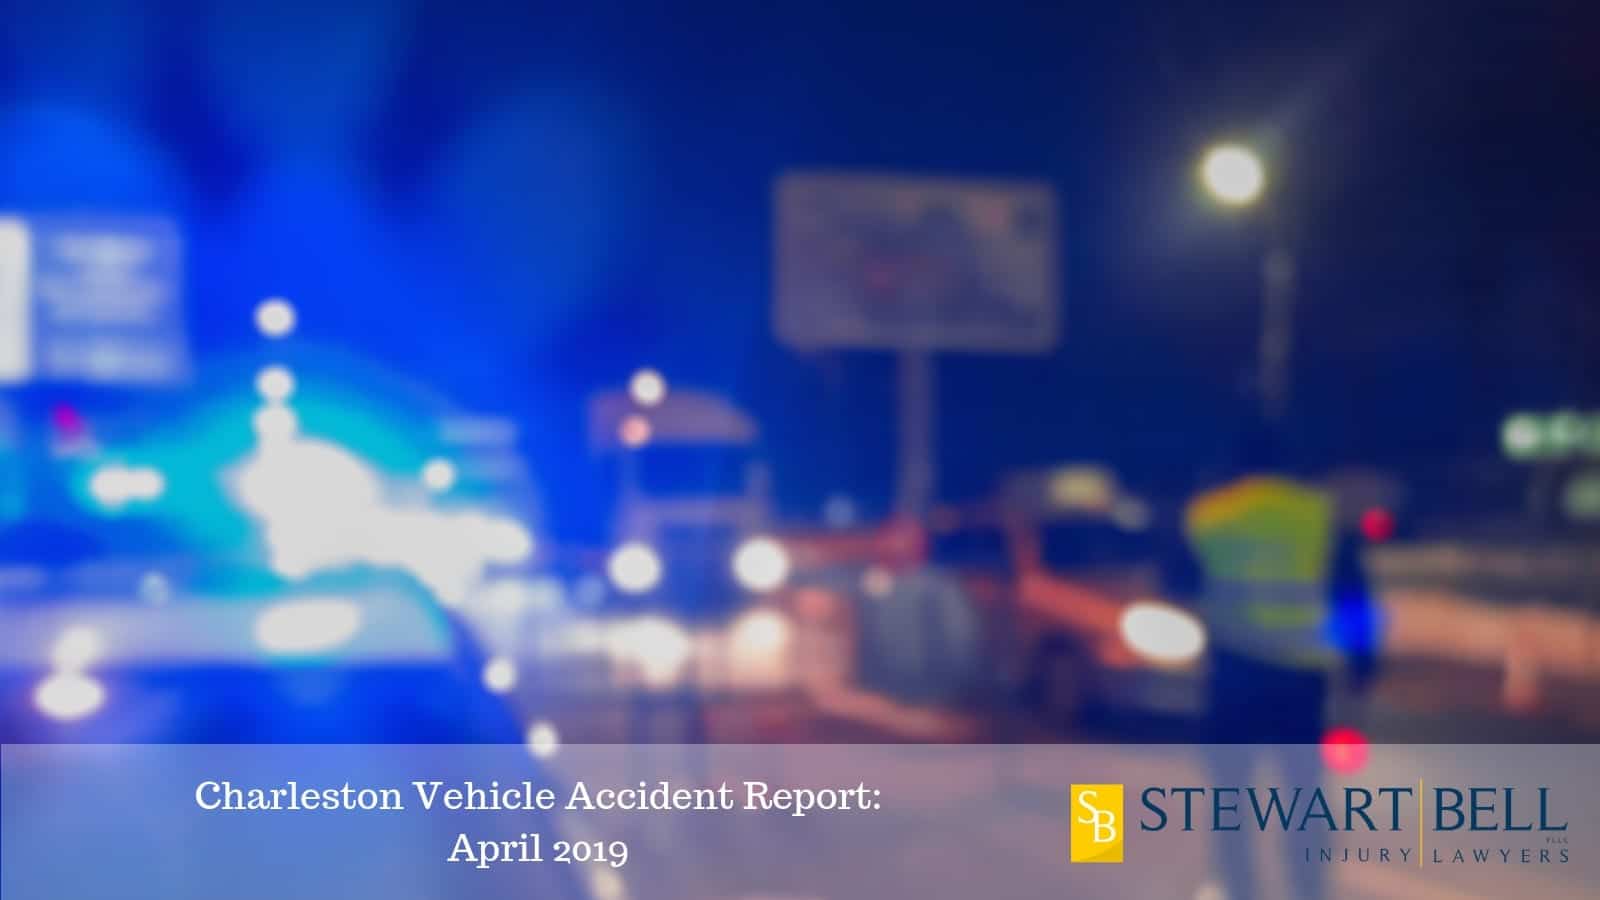 Car Accident At Night Stock Photo